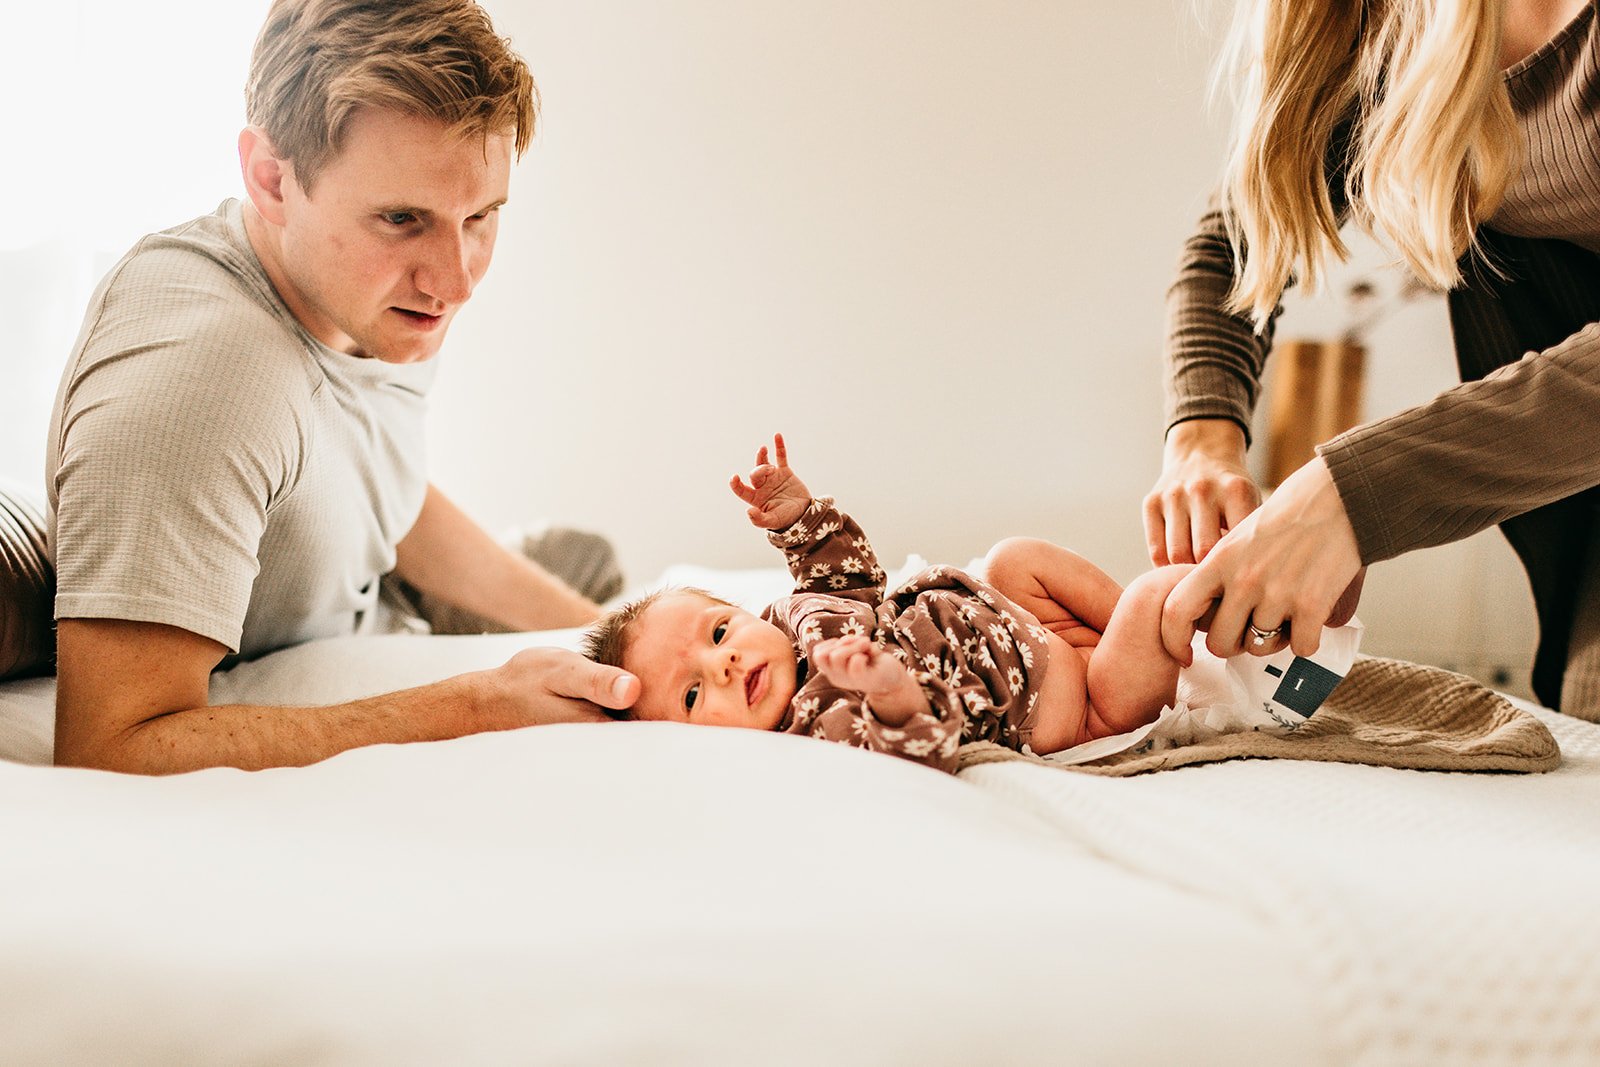 newborn-baby-playtime-with-parents-bed.jpg